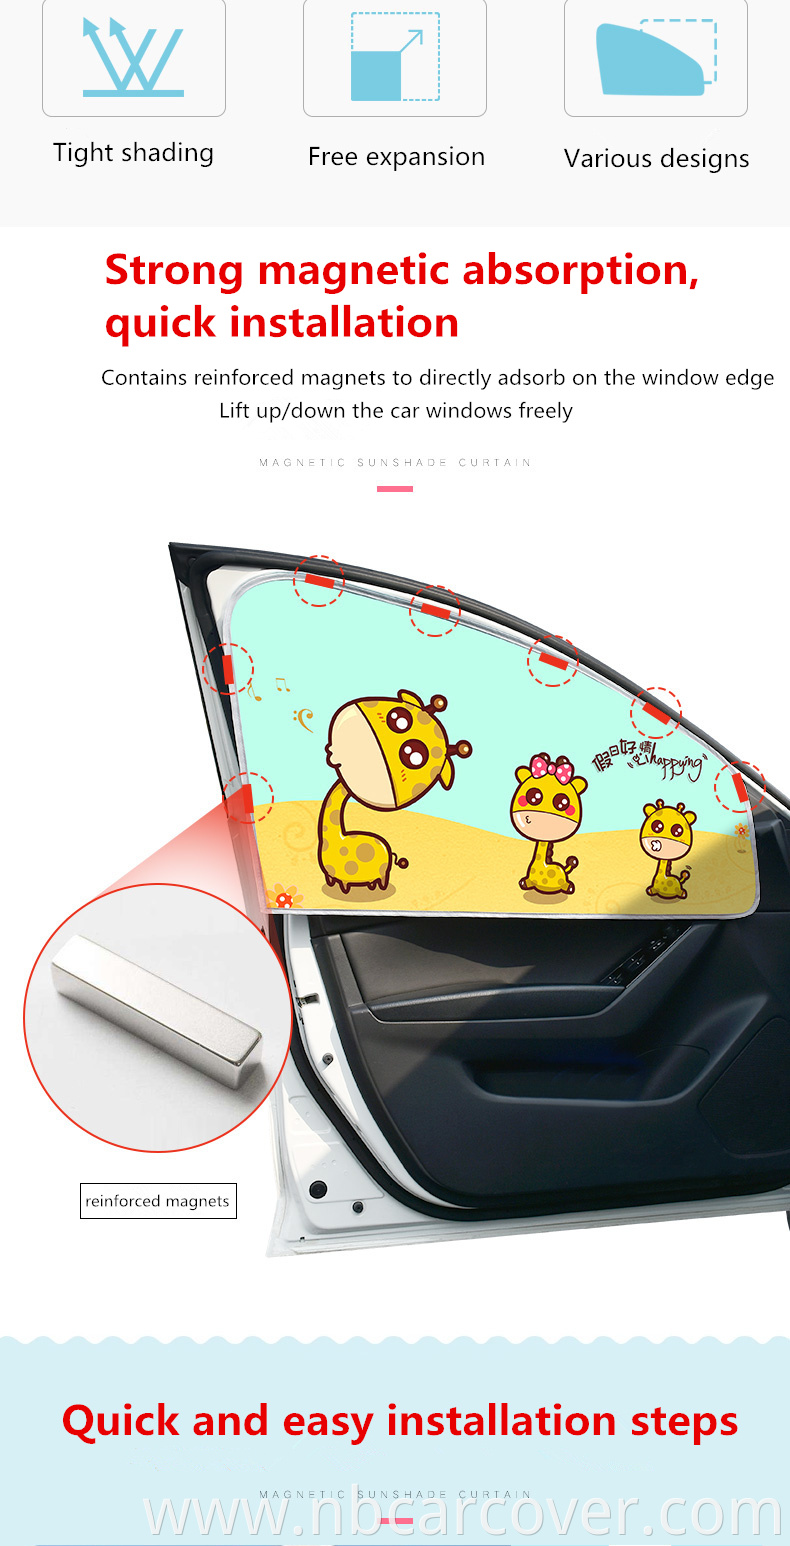 Foldable colorful digital printing baby protection nylon best hight quality sunshade car